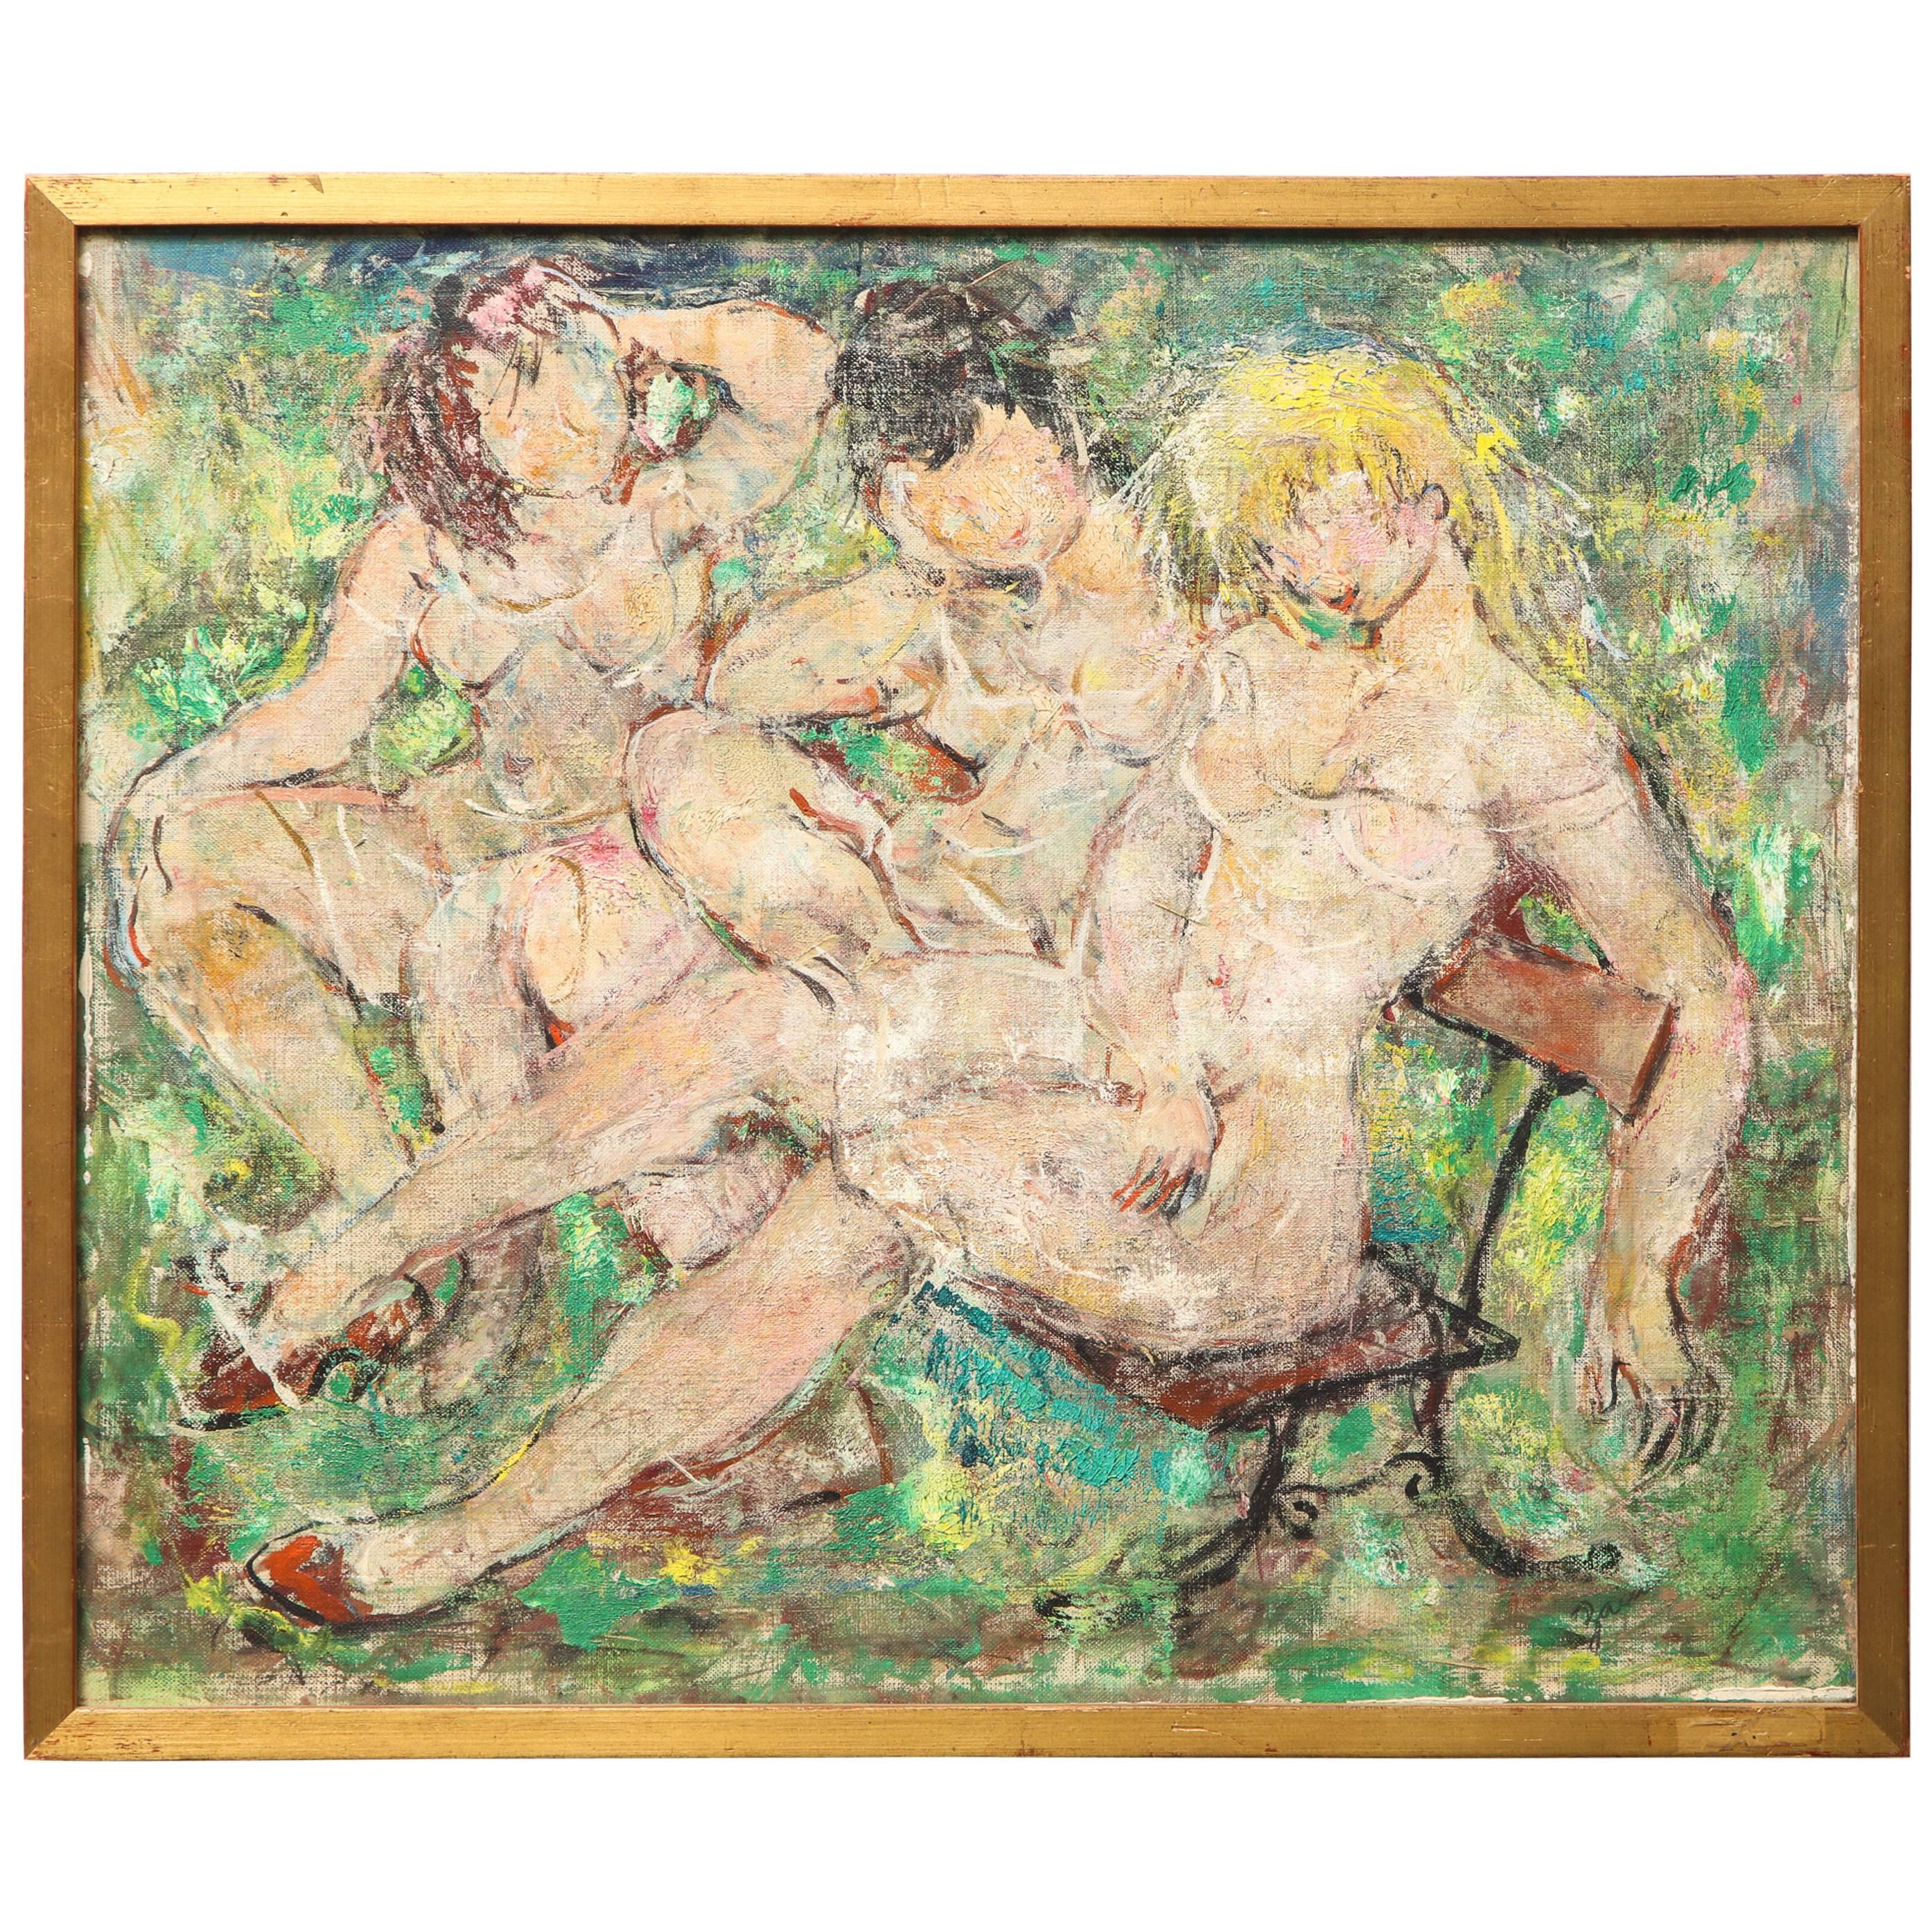 Three Nudes on a Park Bench Oil on Canvas